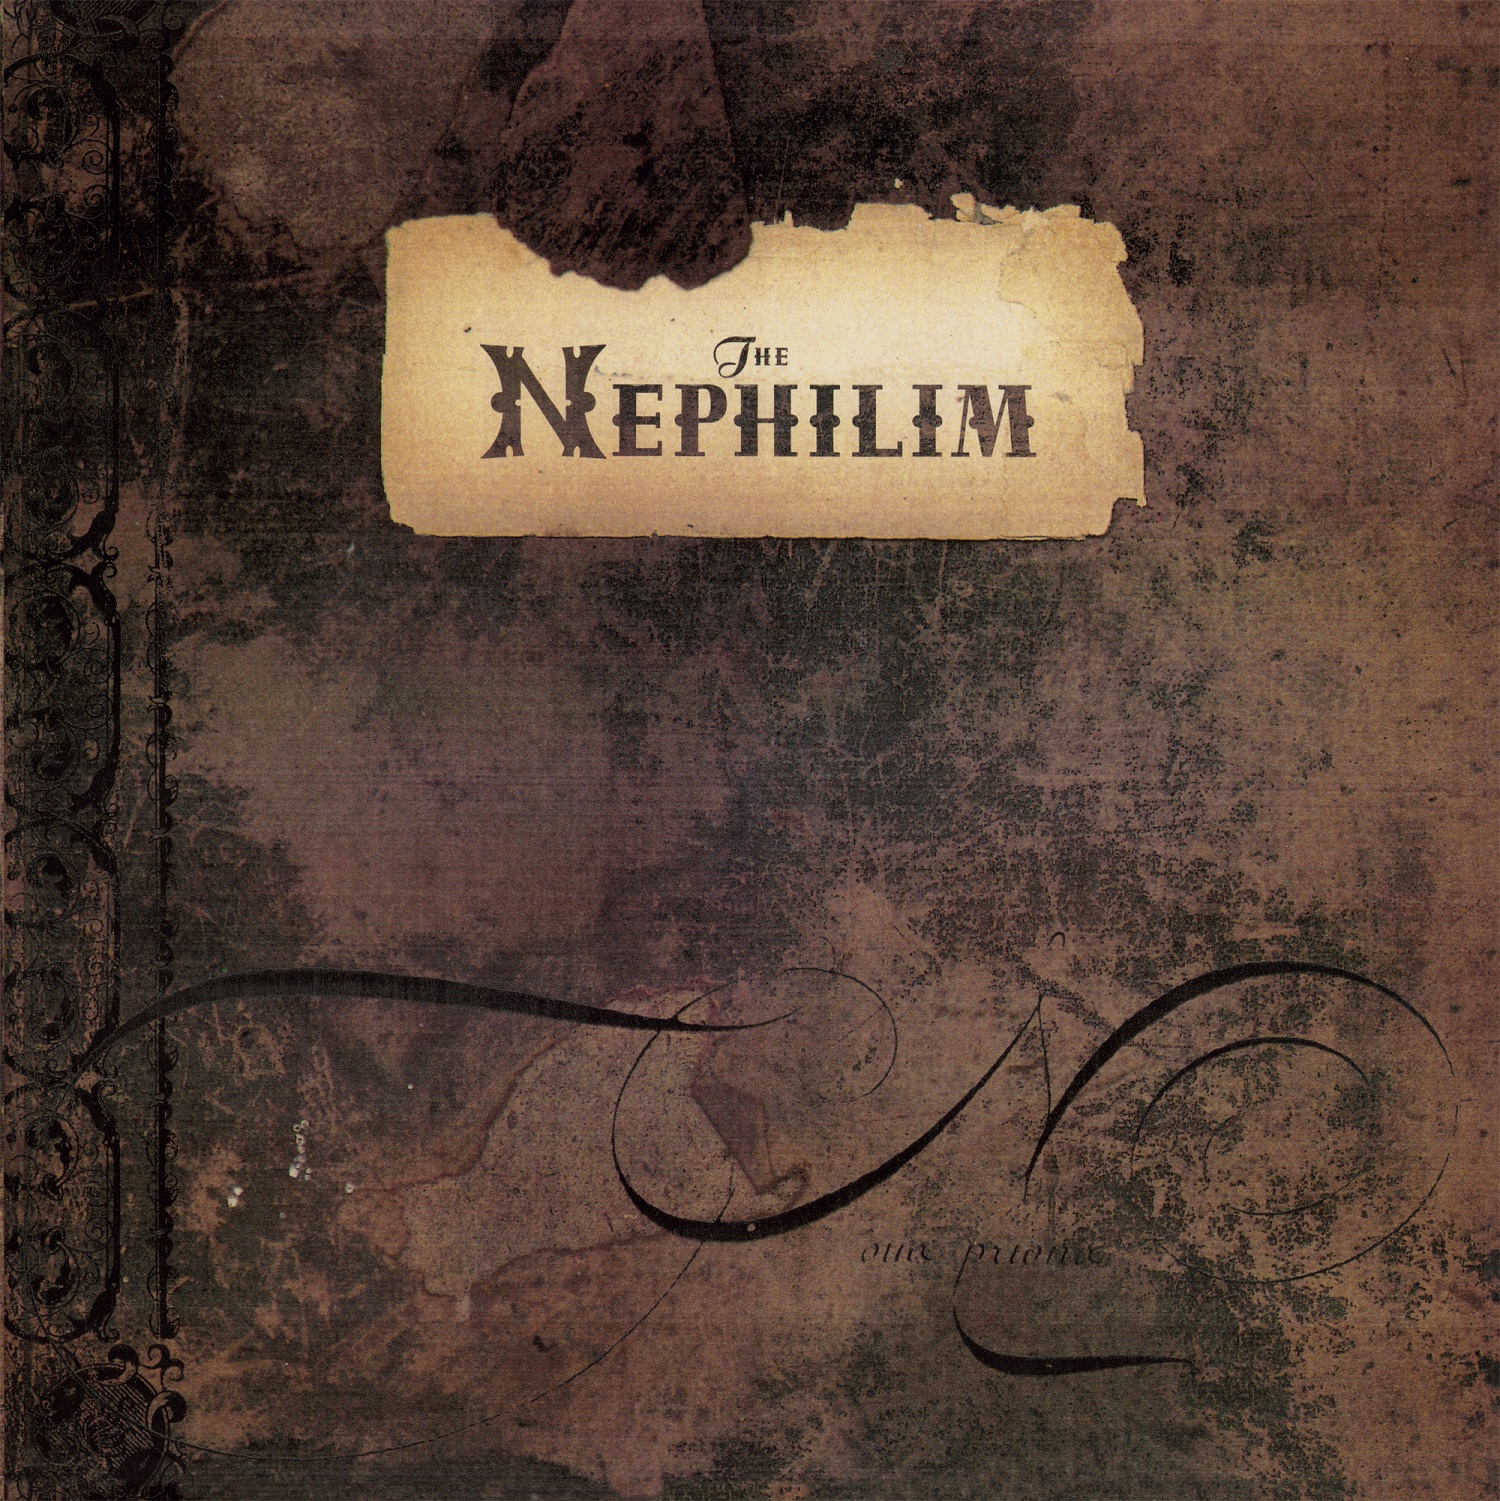 FIELDS OF NEPHILIM – THE NEPHILIM (EXPANDED EDITION – VINYLE COULEUR DORE FONCE) – LP